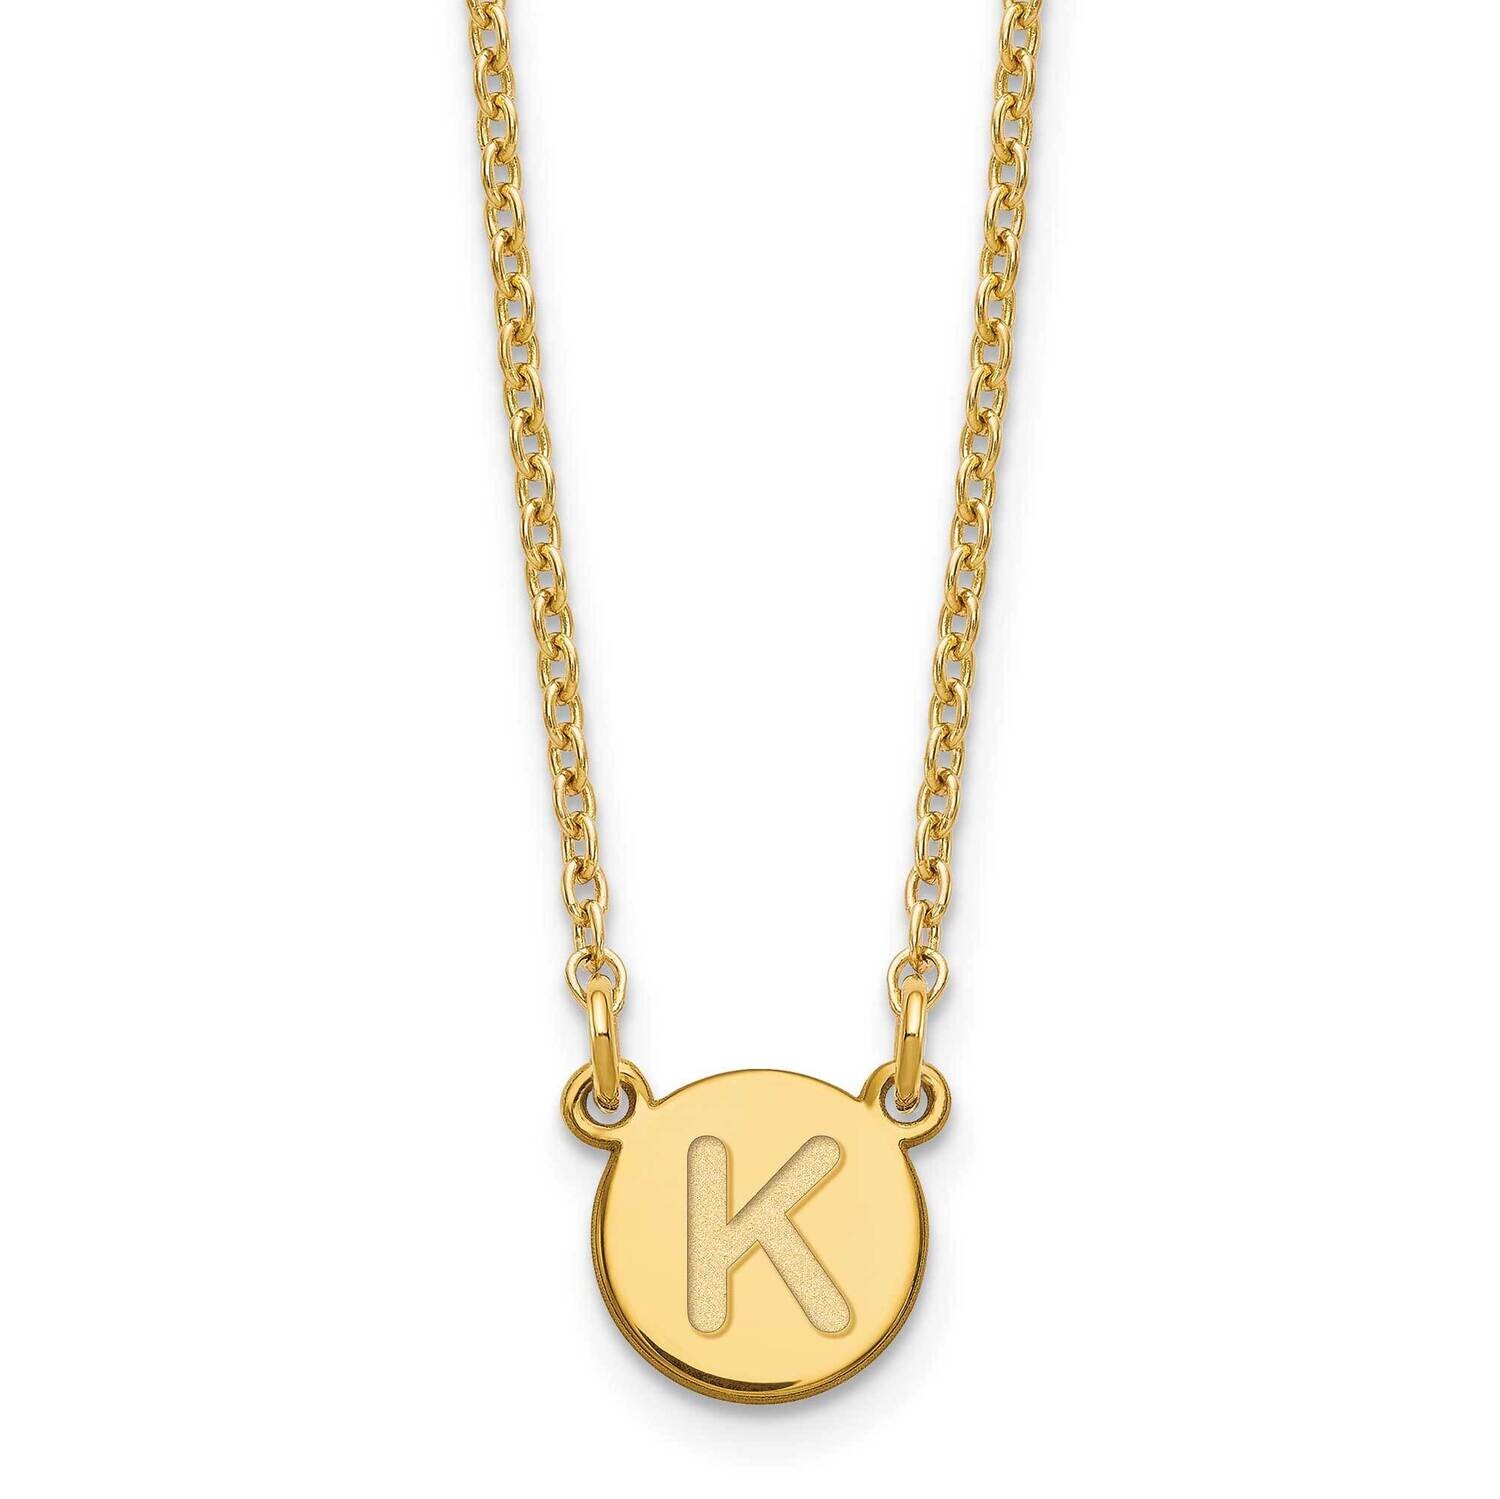 Gold-Plated Tiny Circle Block Letter K Initial Necklace Sterling Silver XNA722GP/K